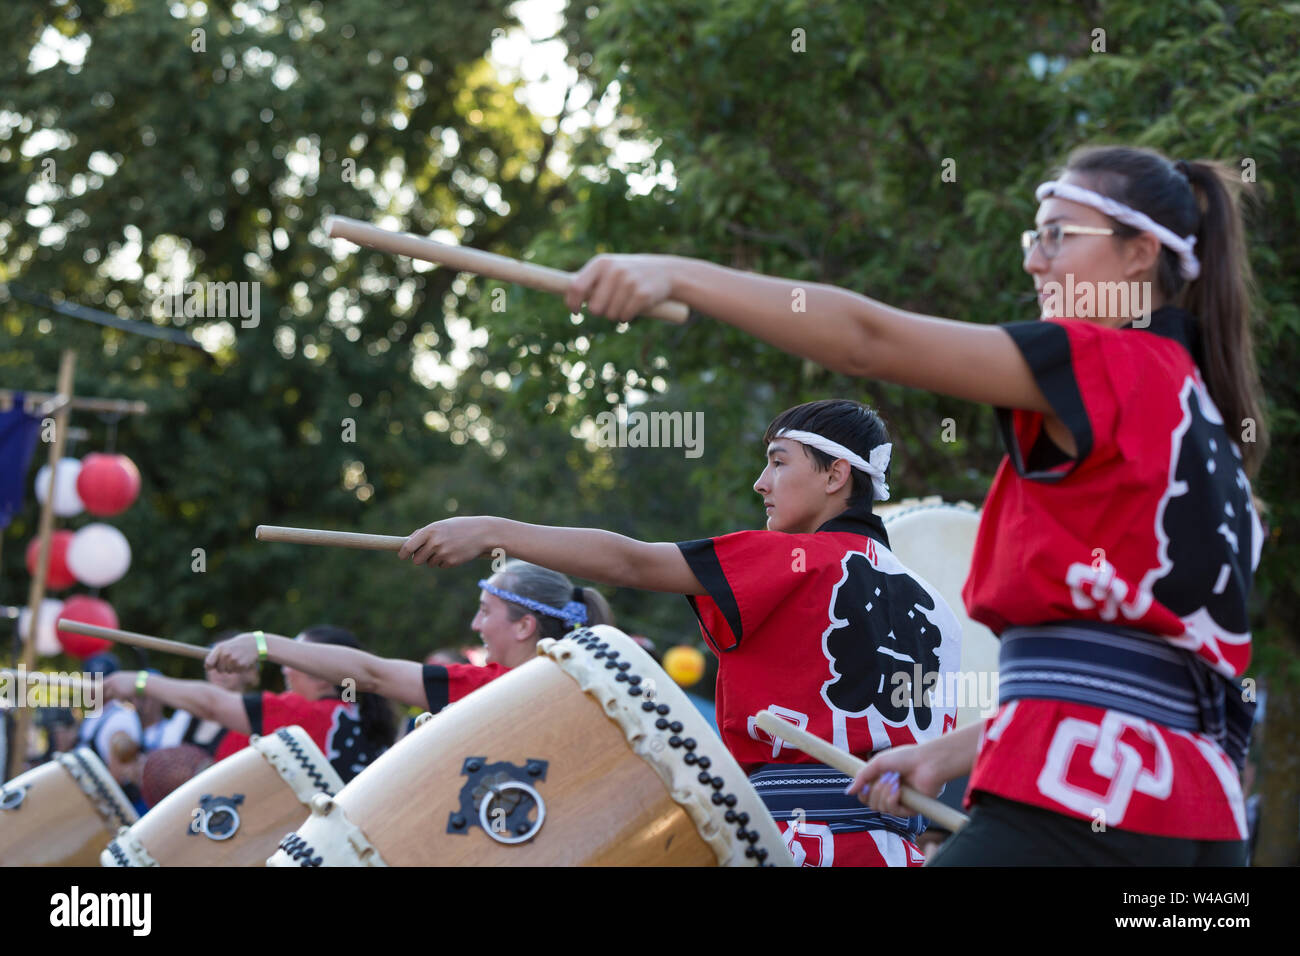 Seattle Matsuri Taiko drum ensemble performs at the 87th annual Bon Odori Festival in Seattle, Washington on July 20, 2019. The lively summer festival includes traditional music and folk dance to welcome the spirits of the dead and celebrate the lives of ancestors. Stock Photo